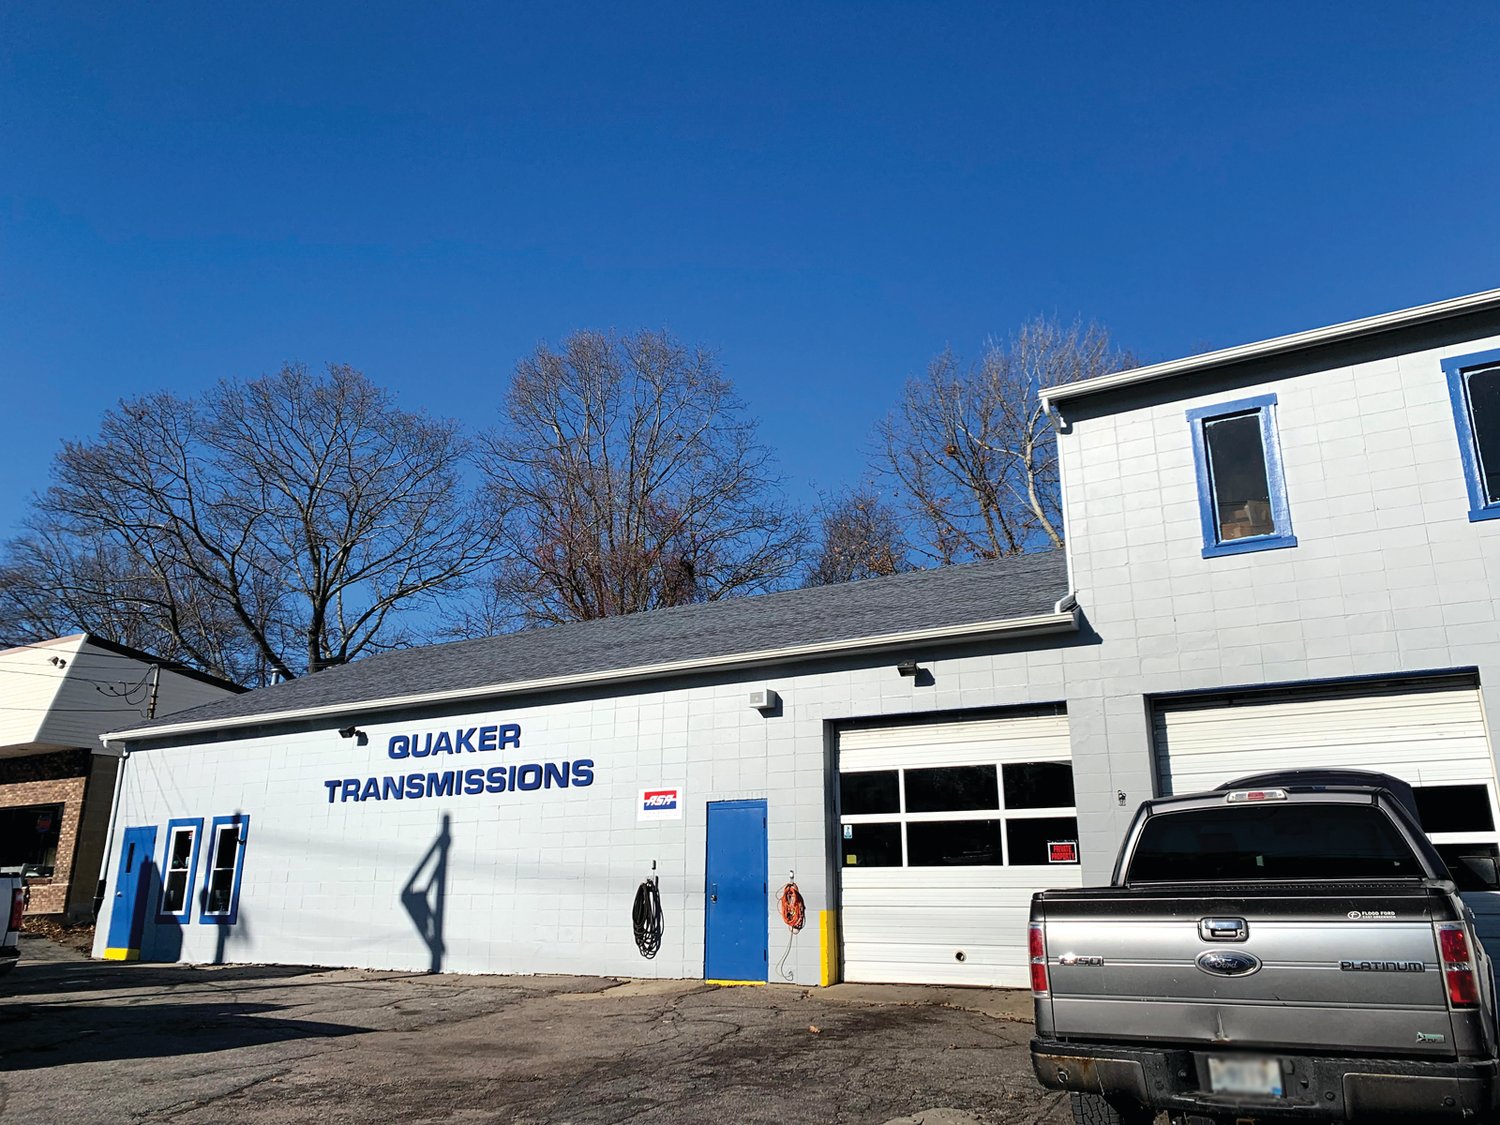 Looking for Quaker Transmissions? Watch for the bold sign of this longstanding landmark on Tiogue Avenue in West Warwick ~ you are in the right place. Call 401-826-2800 today for your appointment.